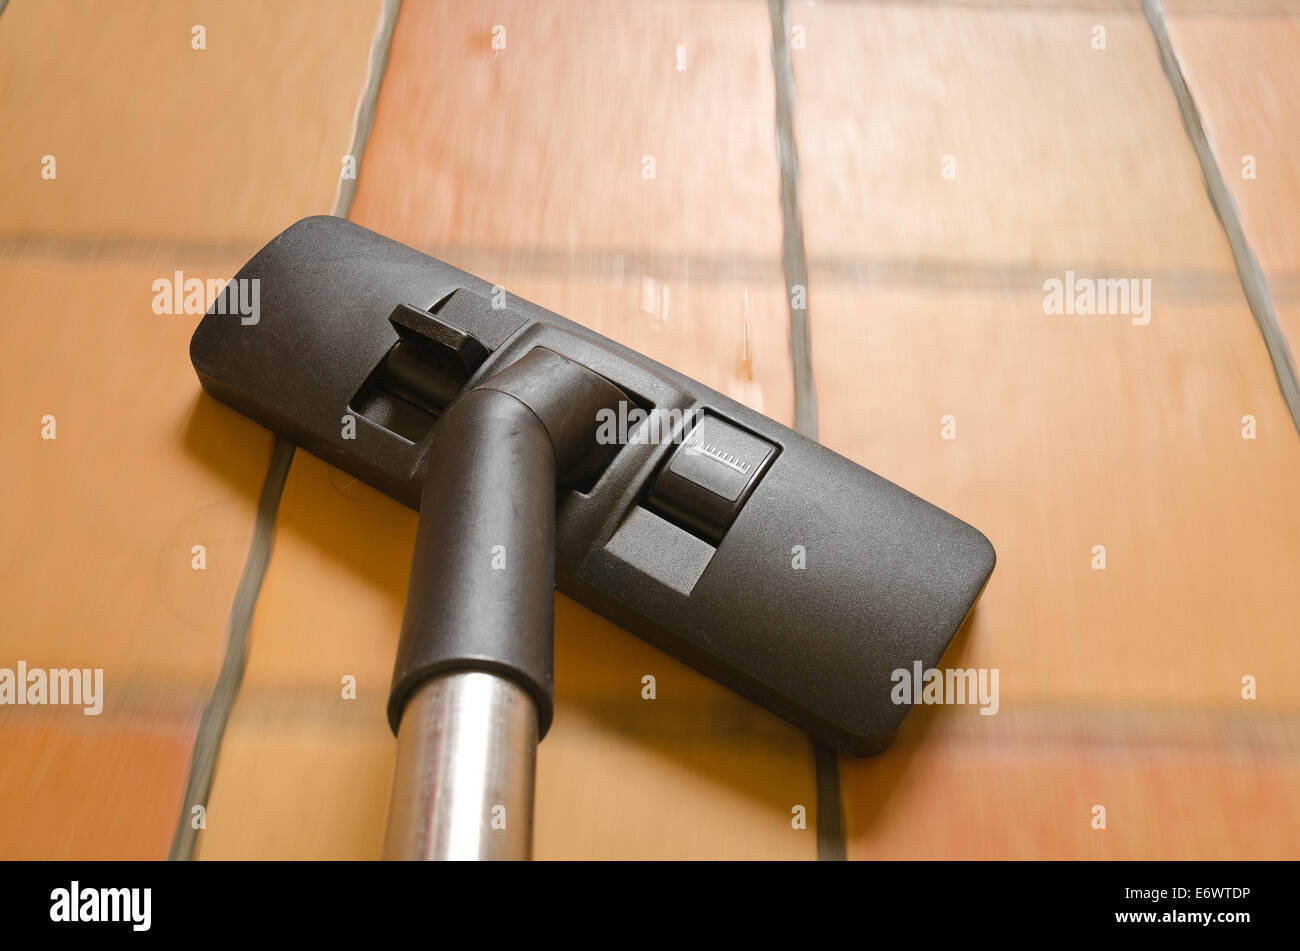 rush action and movement detailed view of hover nozzle being swept over carpets tiles wooden floor cleaning up dirt and dust Stock Photo